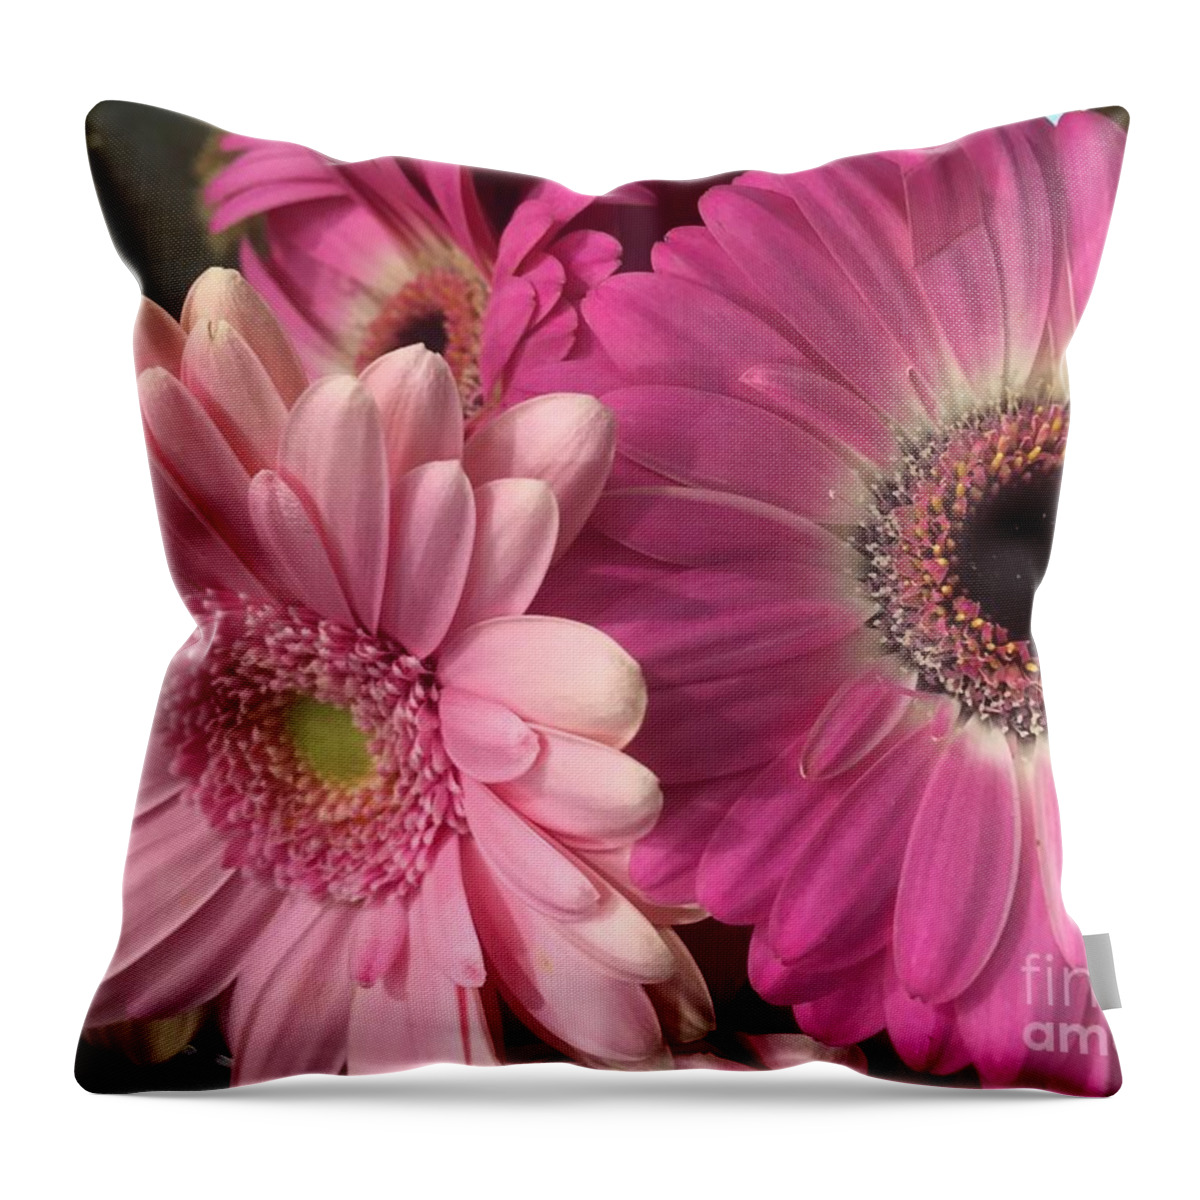 Pink Throw Pillow featuring the photograph Spring N Winter by Nona Kumah